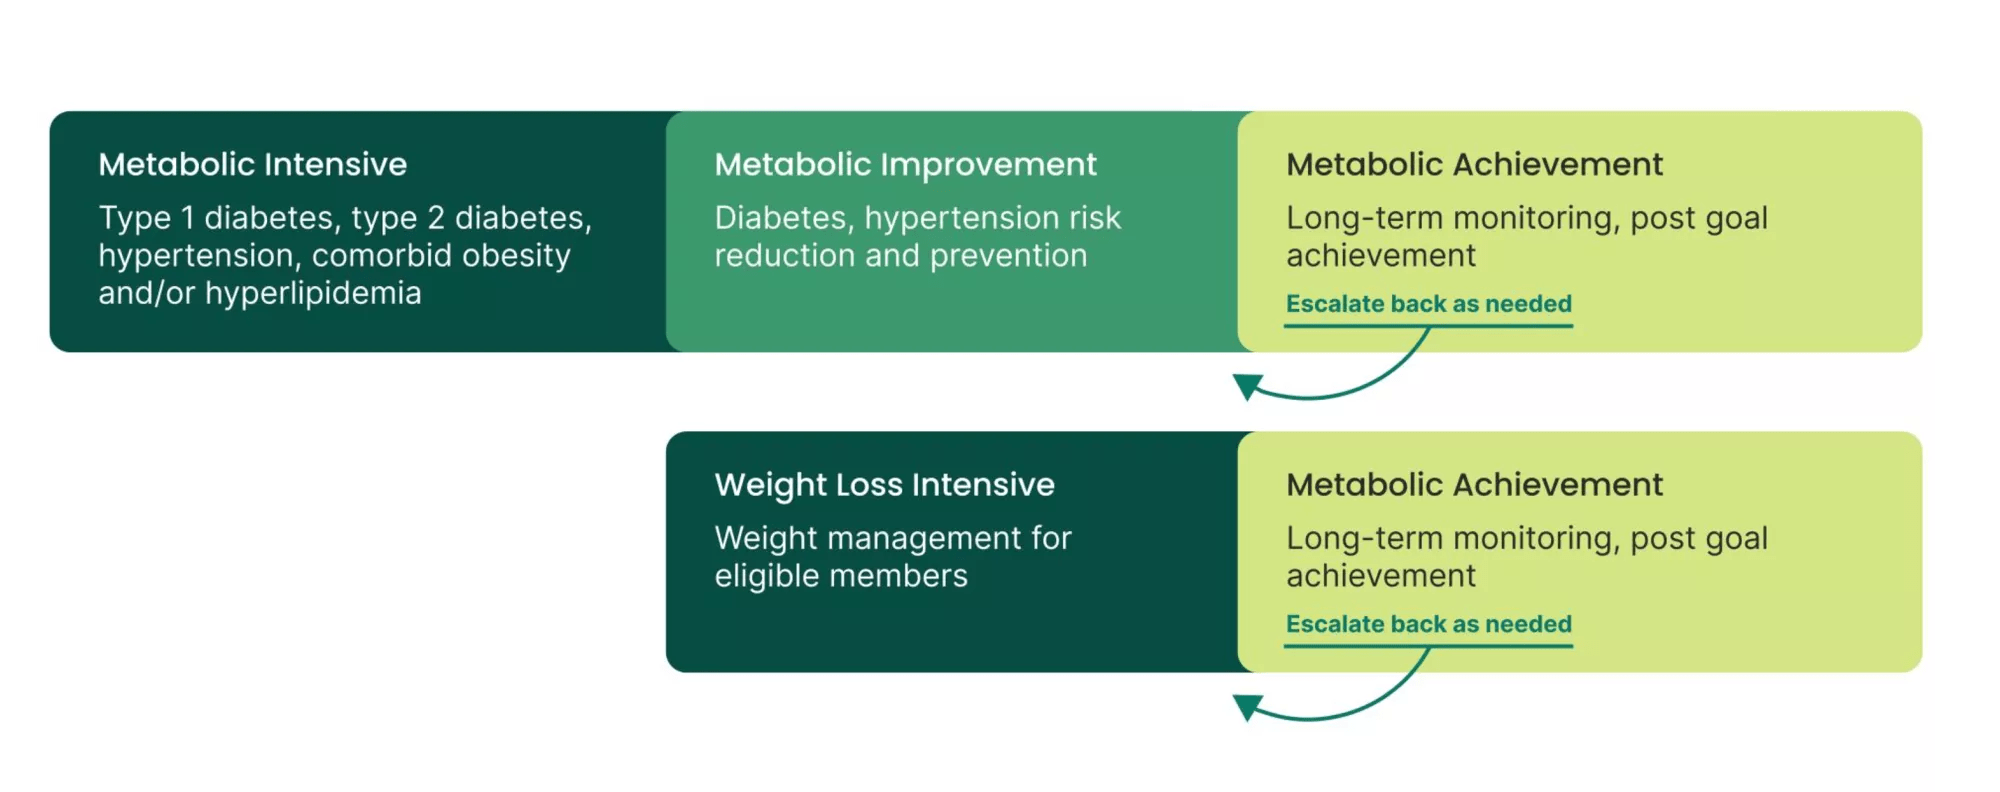 Verily Lightpath Metabolic will be a chronic care solution for managing metabolic conditions across multiple layers of acuity including Metabolic Intensive, Metabolic Improvement, Weight Loss Intensive, and Metabolic Achievement.